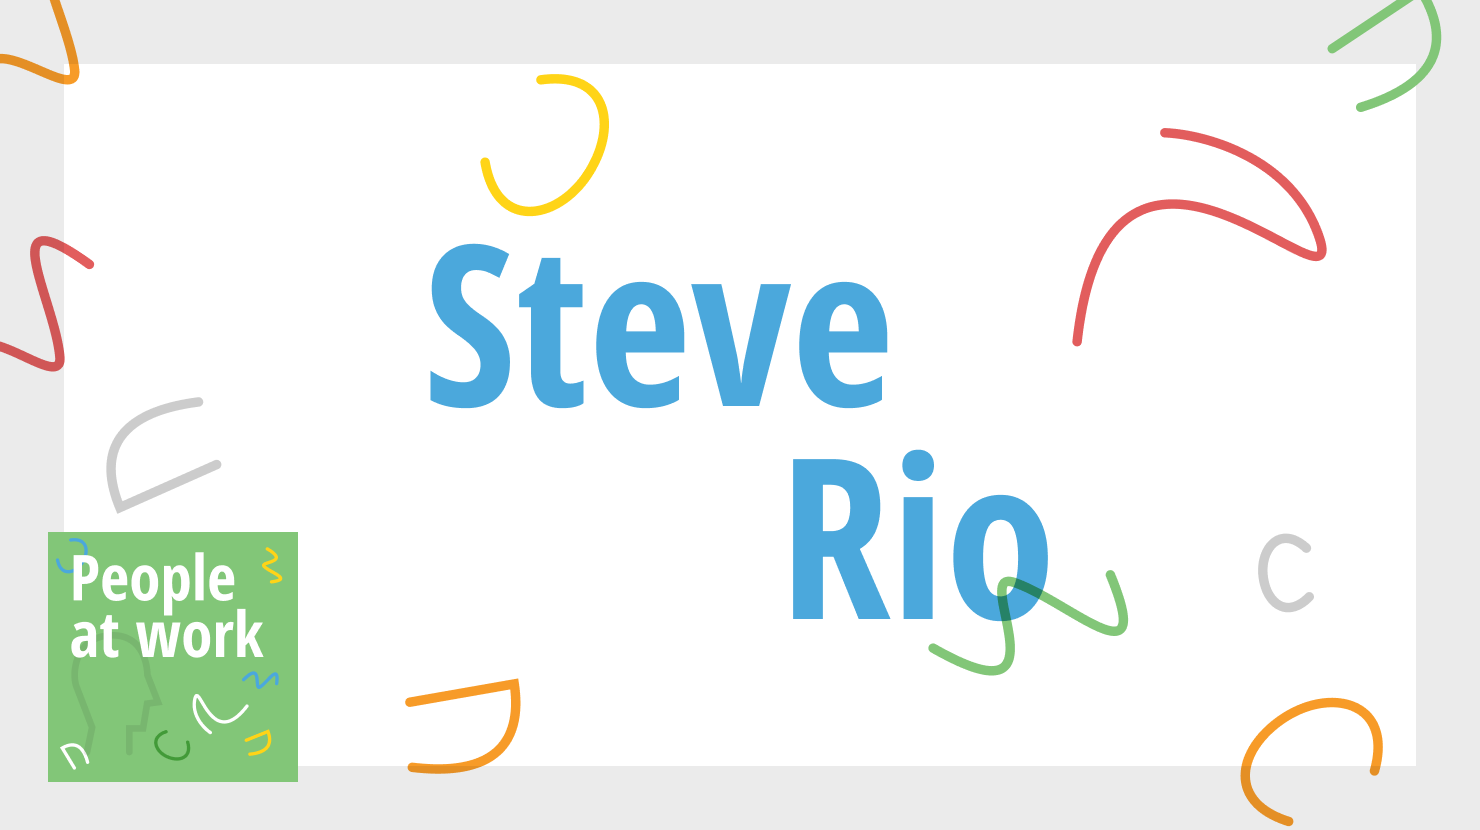 Add structure to save your time and attention (and your life) with Steve Rio